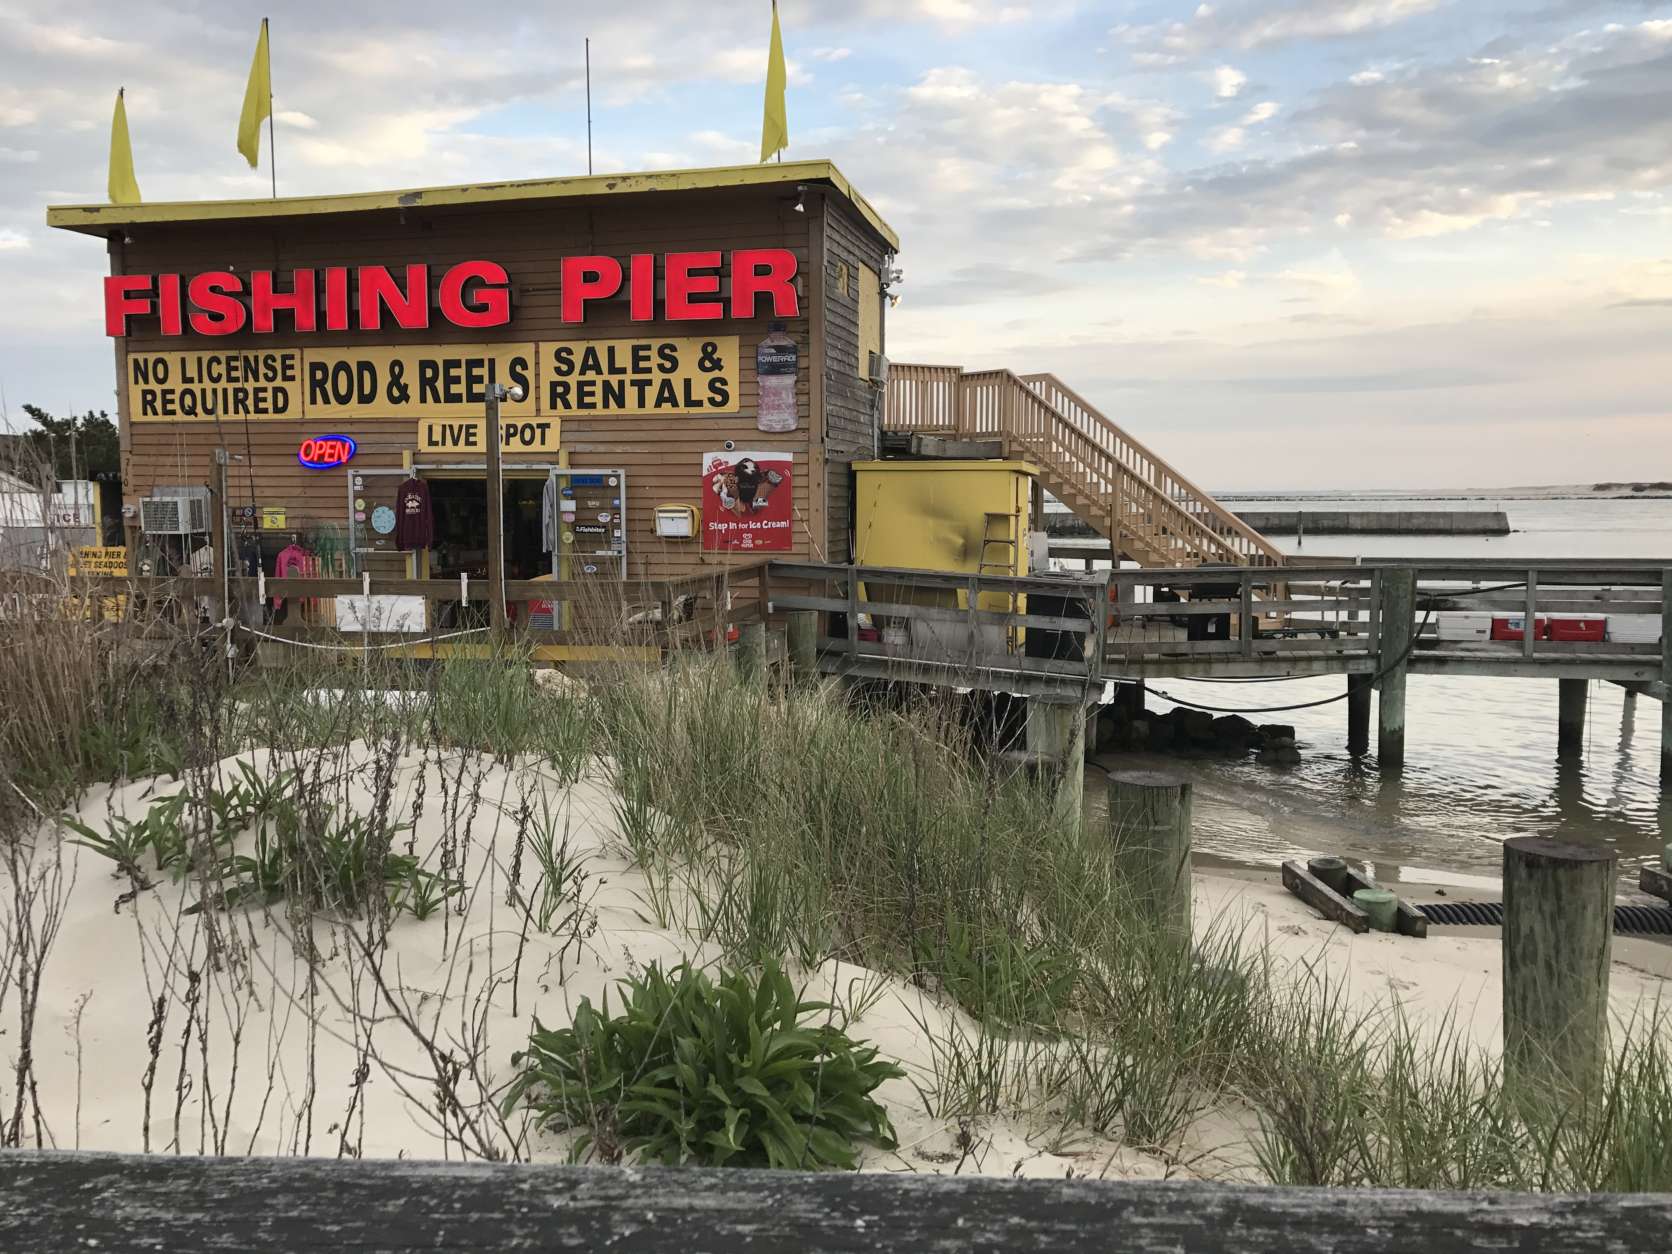 If you don't have a rod and a reel, you can rent them at Ocean City's Fishing Pier. Just drive as far south as you can on Philadelphia Avenue and you'll hit the fisherman's standby. (WTOP/Megan Cloherty)